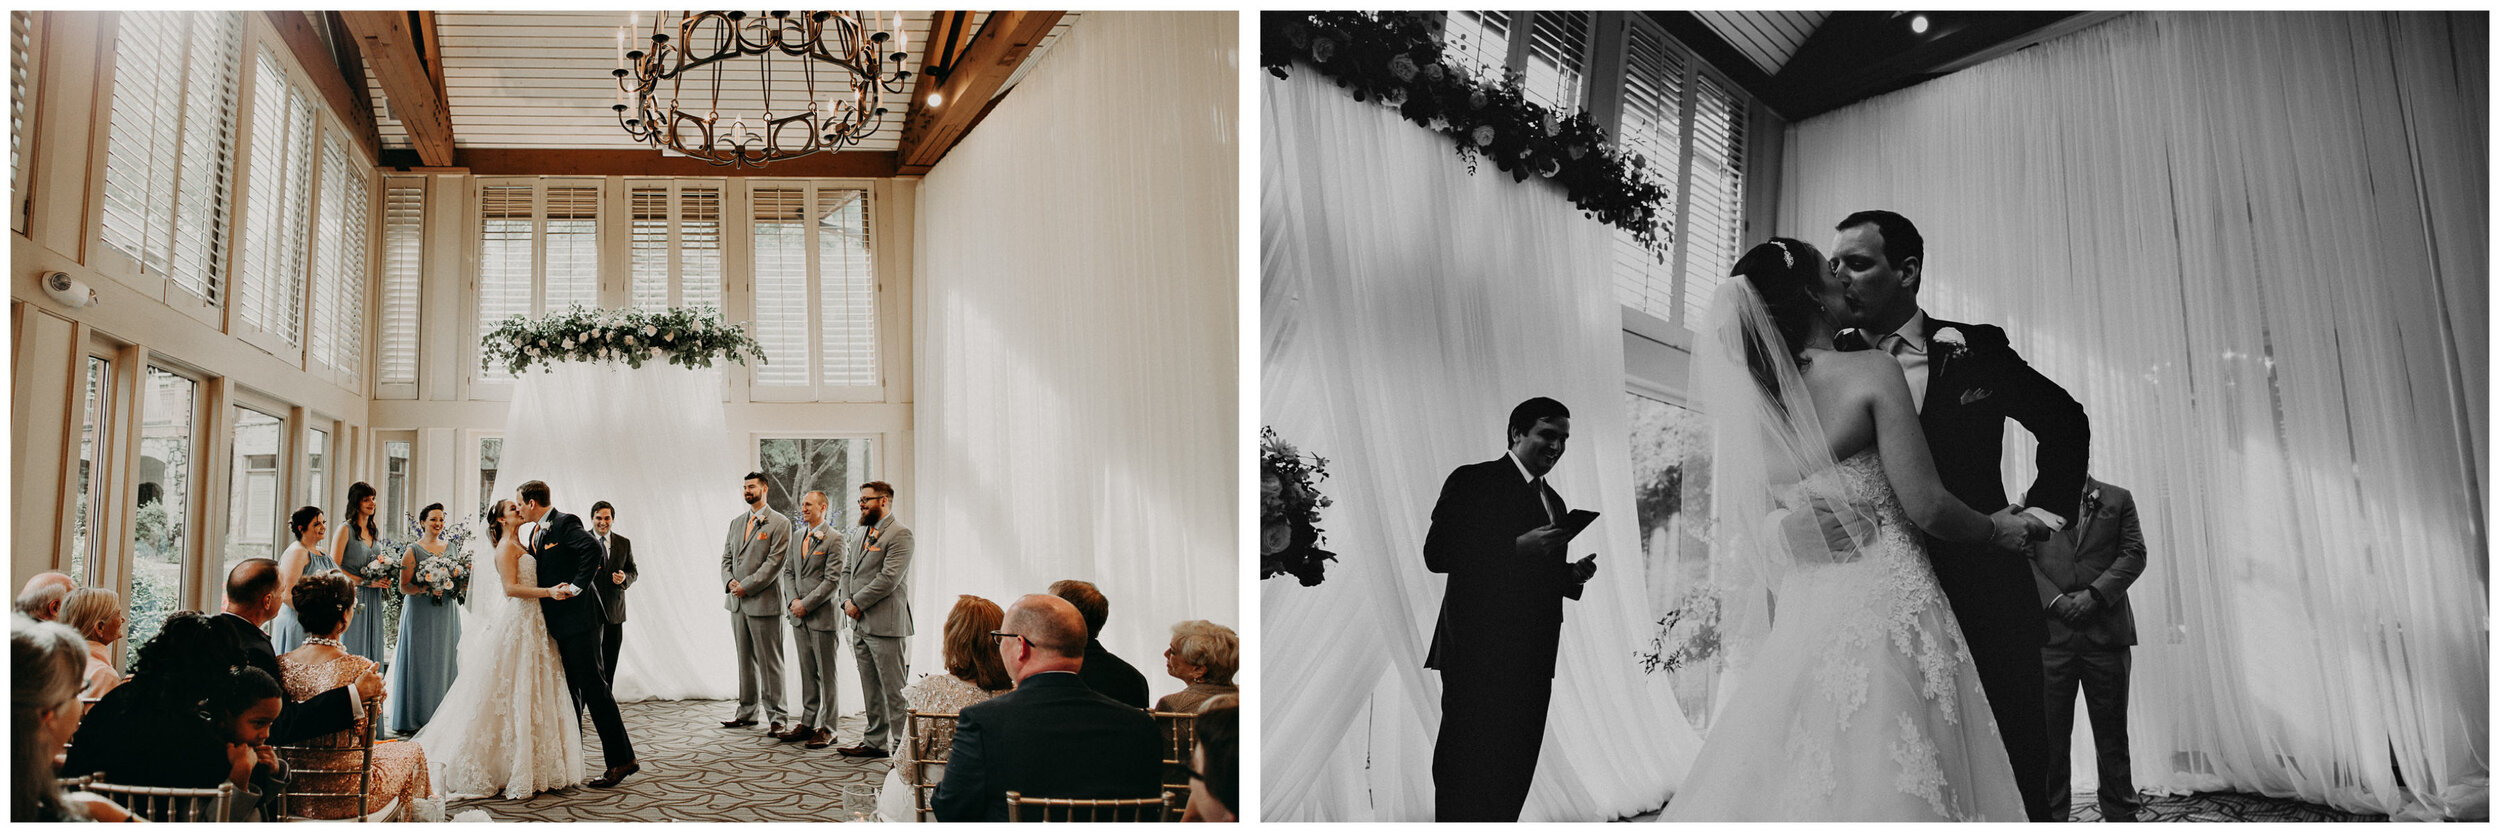 Christa & Ben's Wedding Day || Atlanta Spring Wedding at The Country Club of The South52.jpg